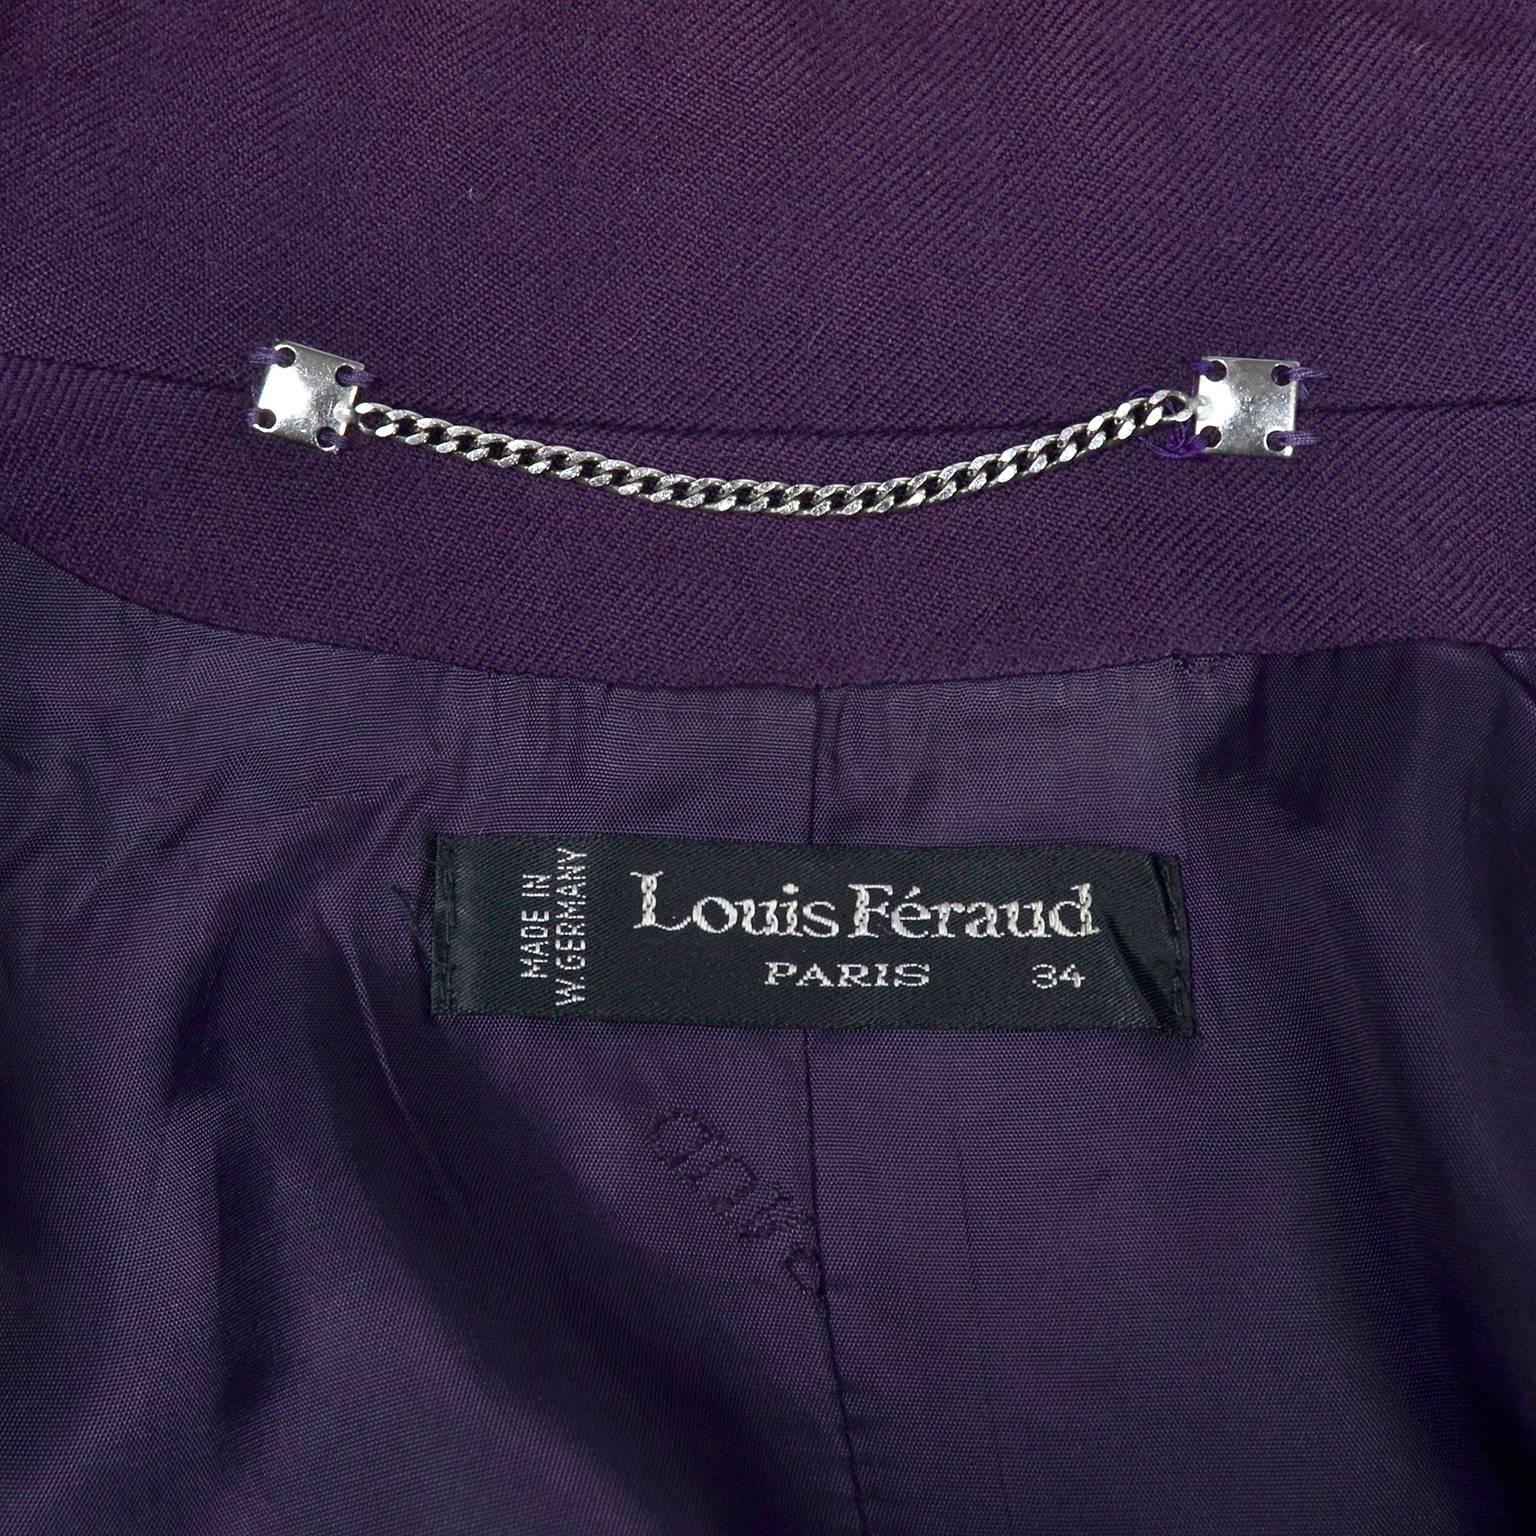 1980s Louis Feraud Purple Wool Vintage Coat With Pockets Size 34 For Sale 1